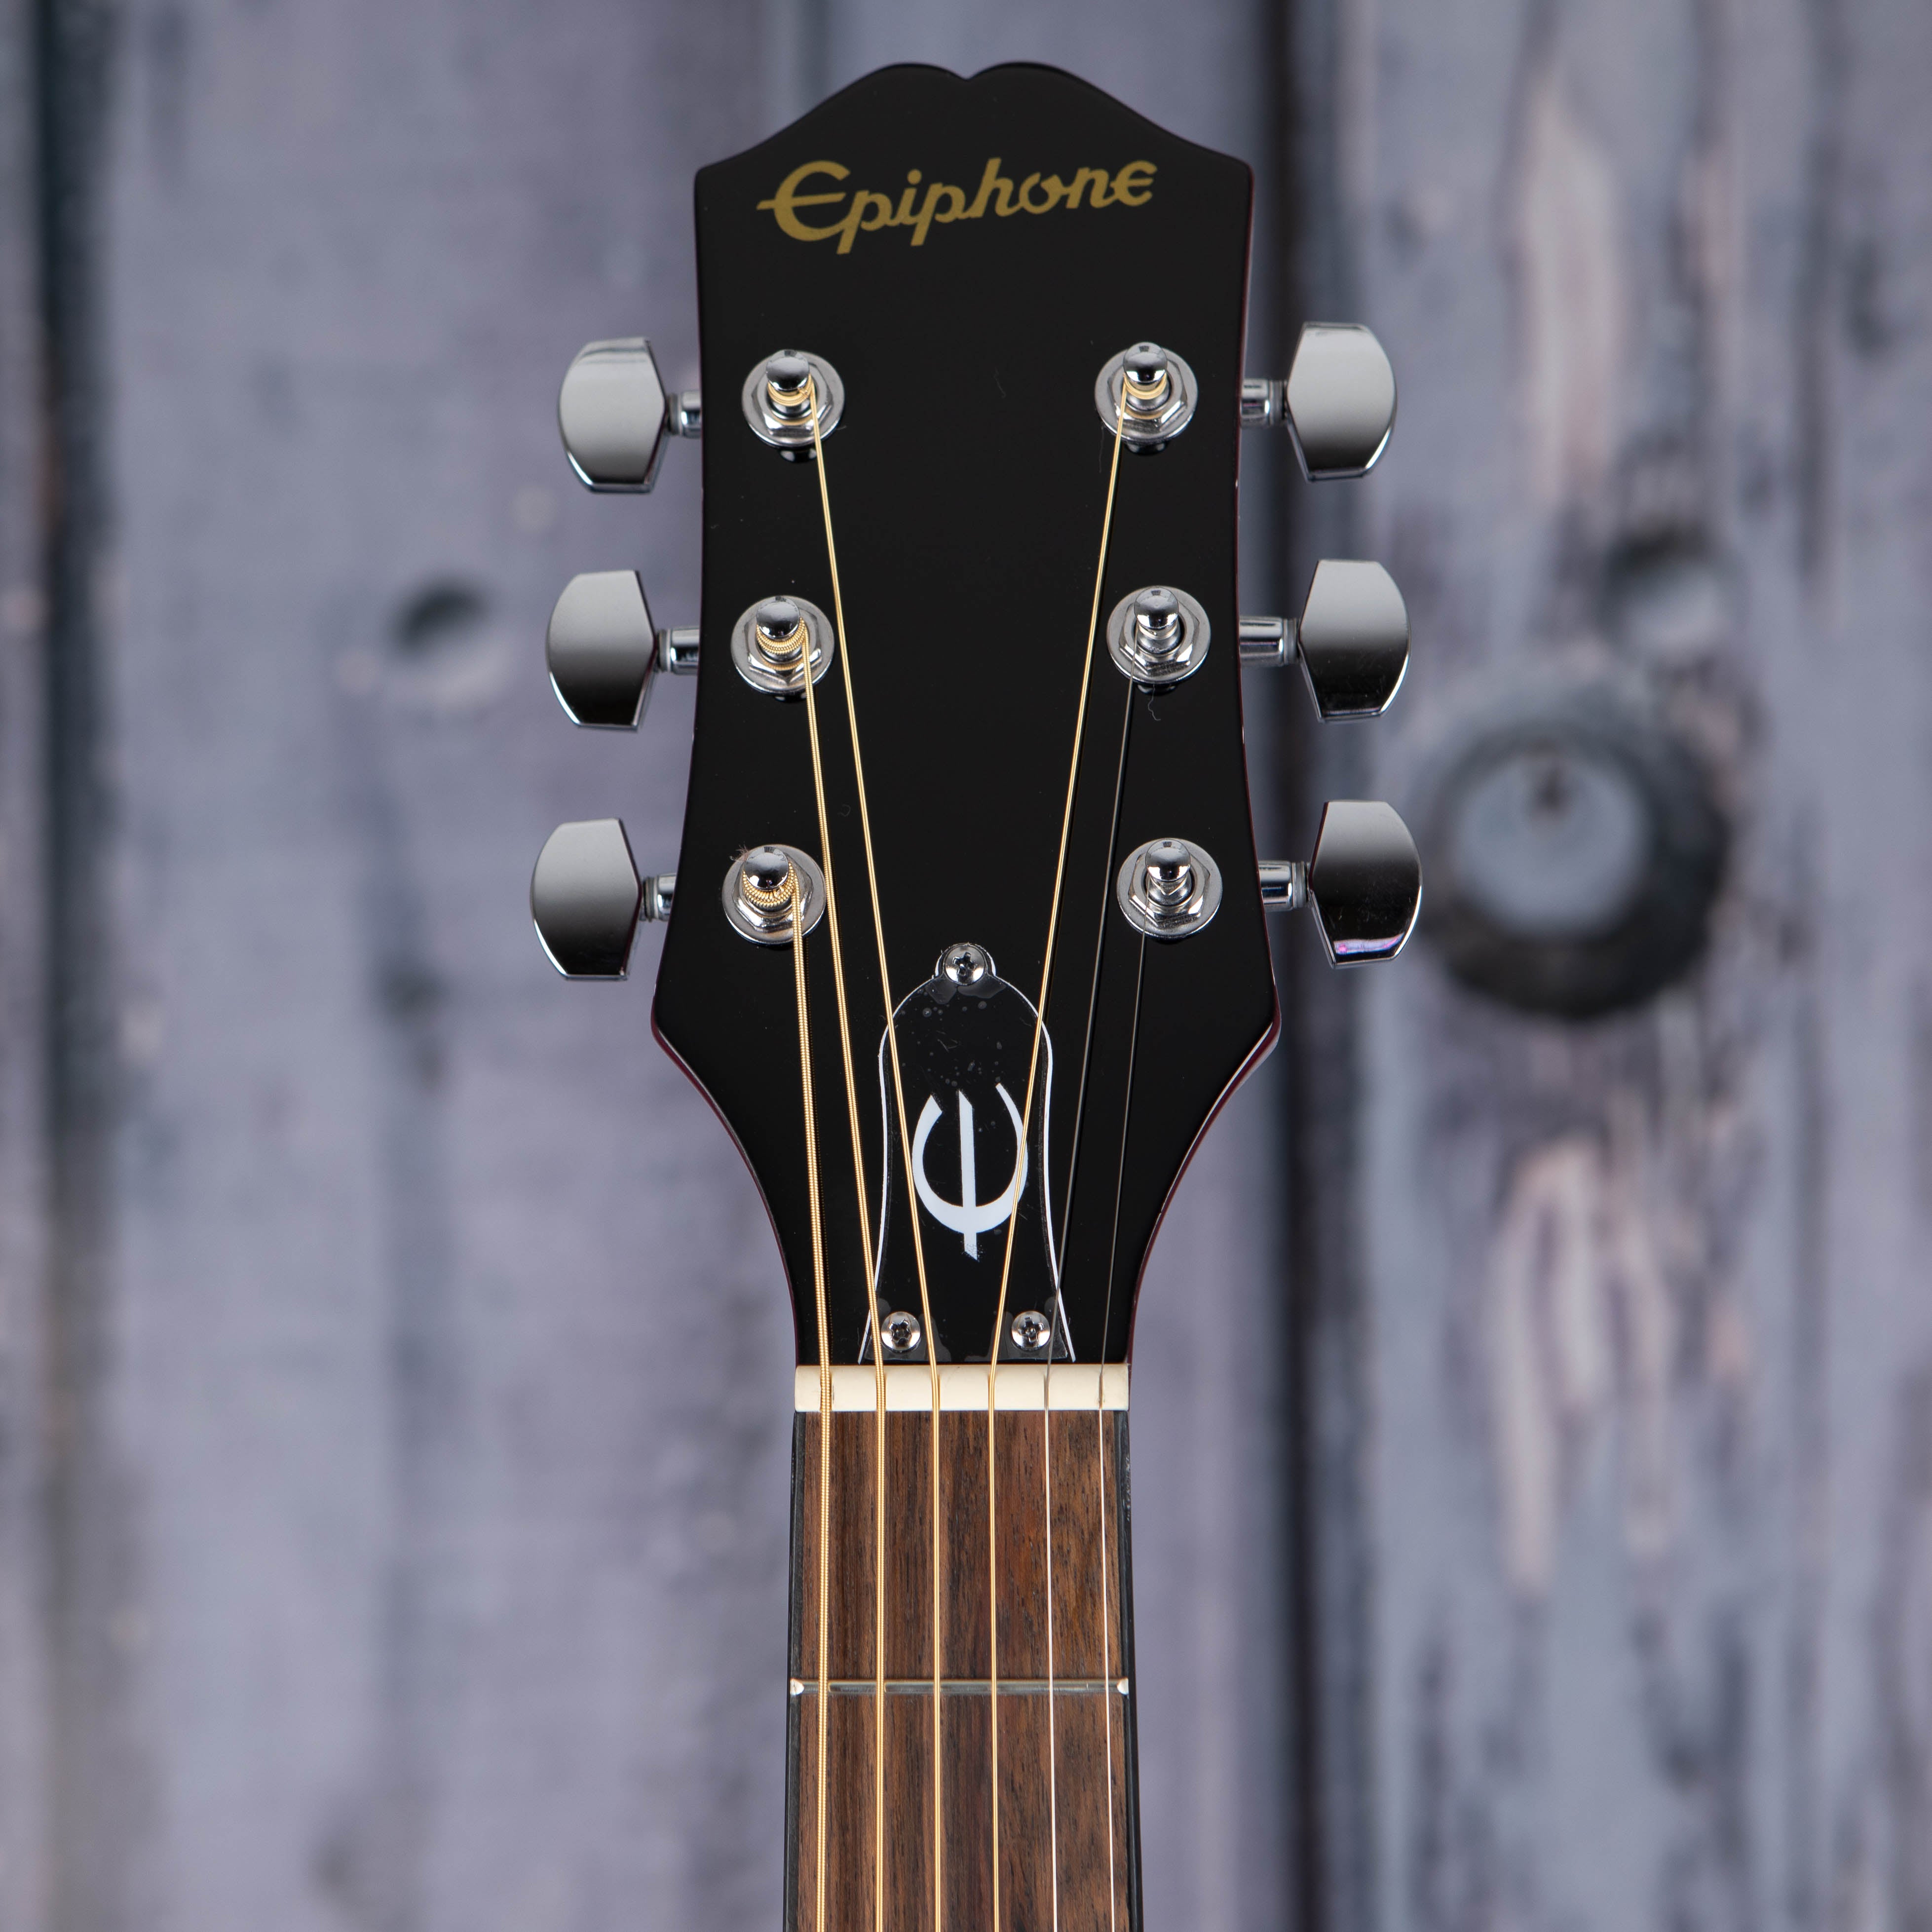 Epiphone Starling Acoustic Guitar, Hot Pink Pearl, front headstock